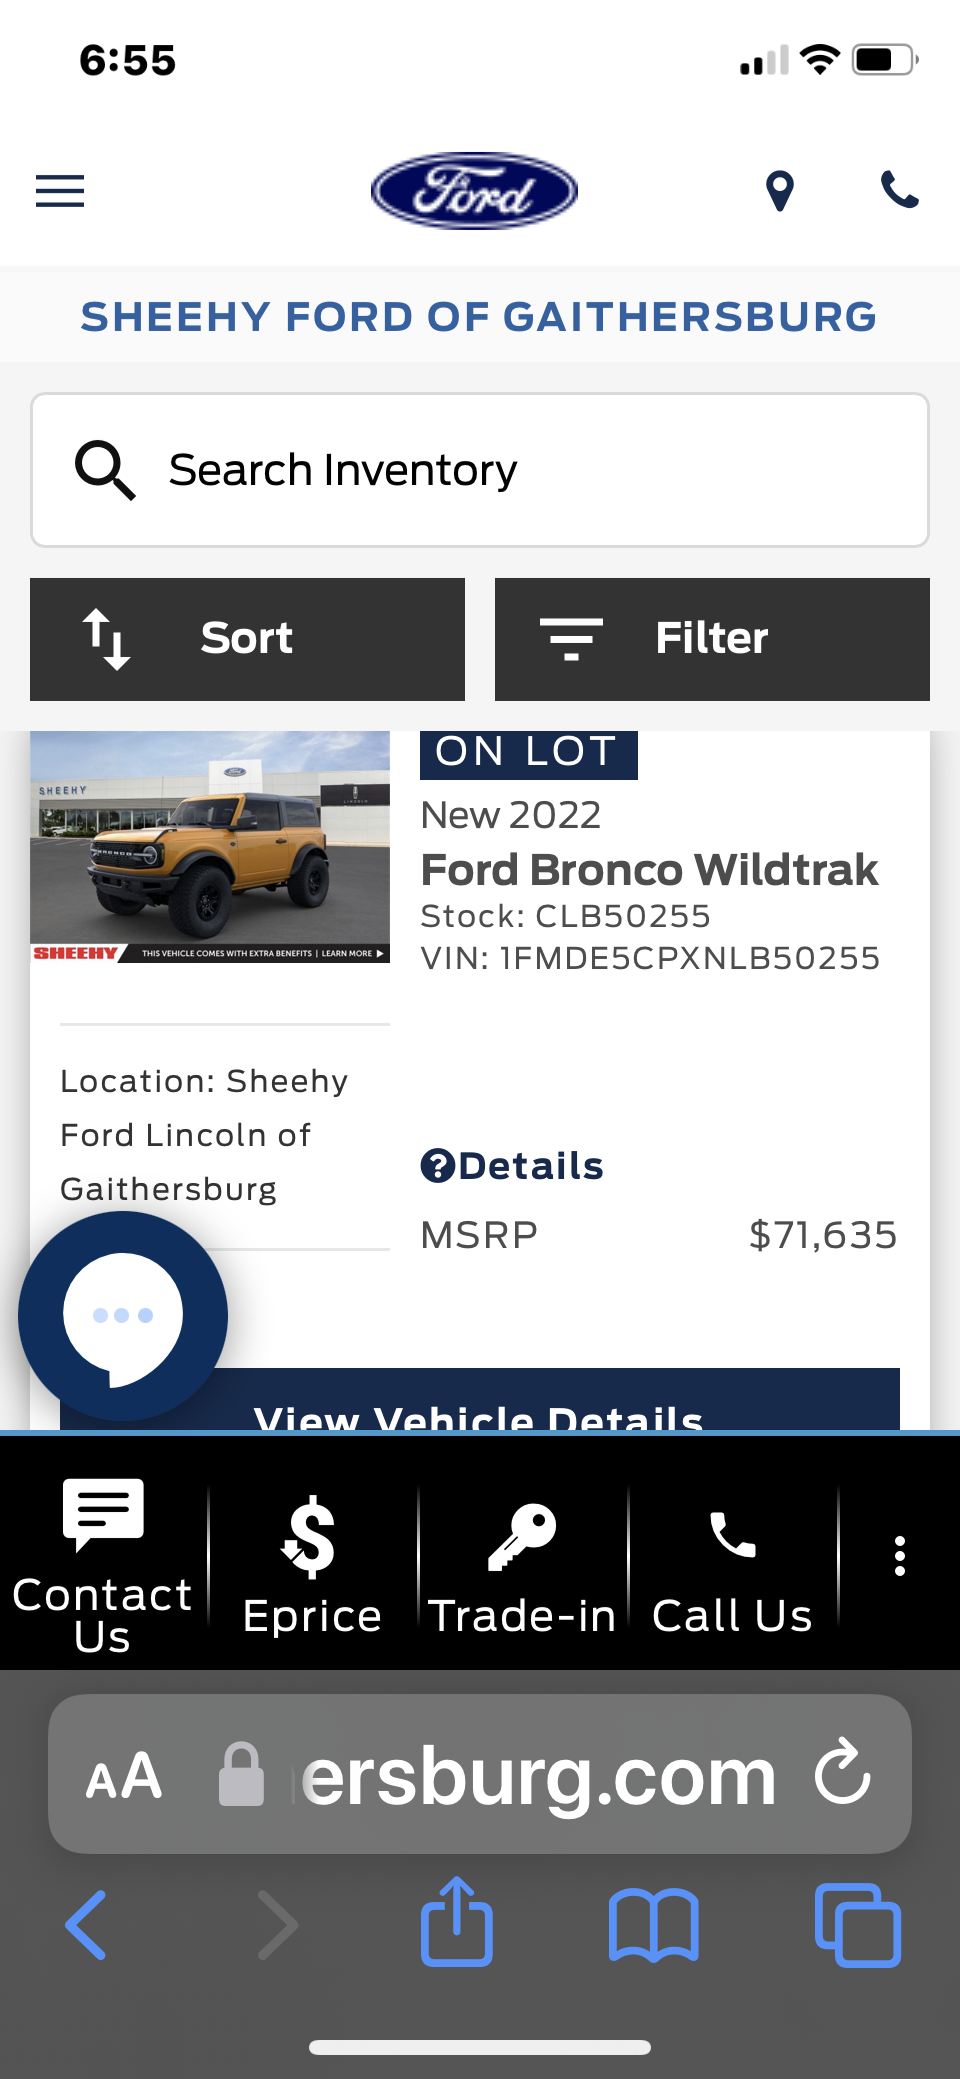 Ford Bronco Granger Ford July Update - Allocation for September Production, Current wait list, 2023 Speculation FEB83B84-80CD-494E-A60B-97C87D31EF09